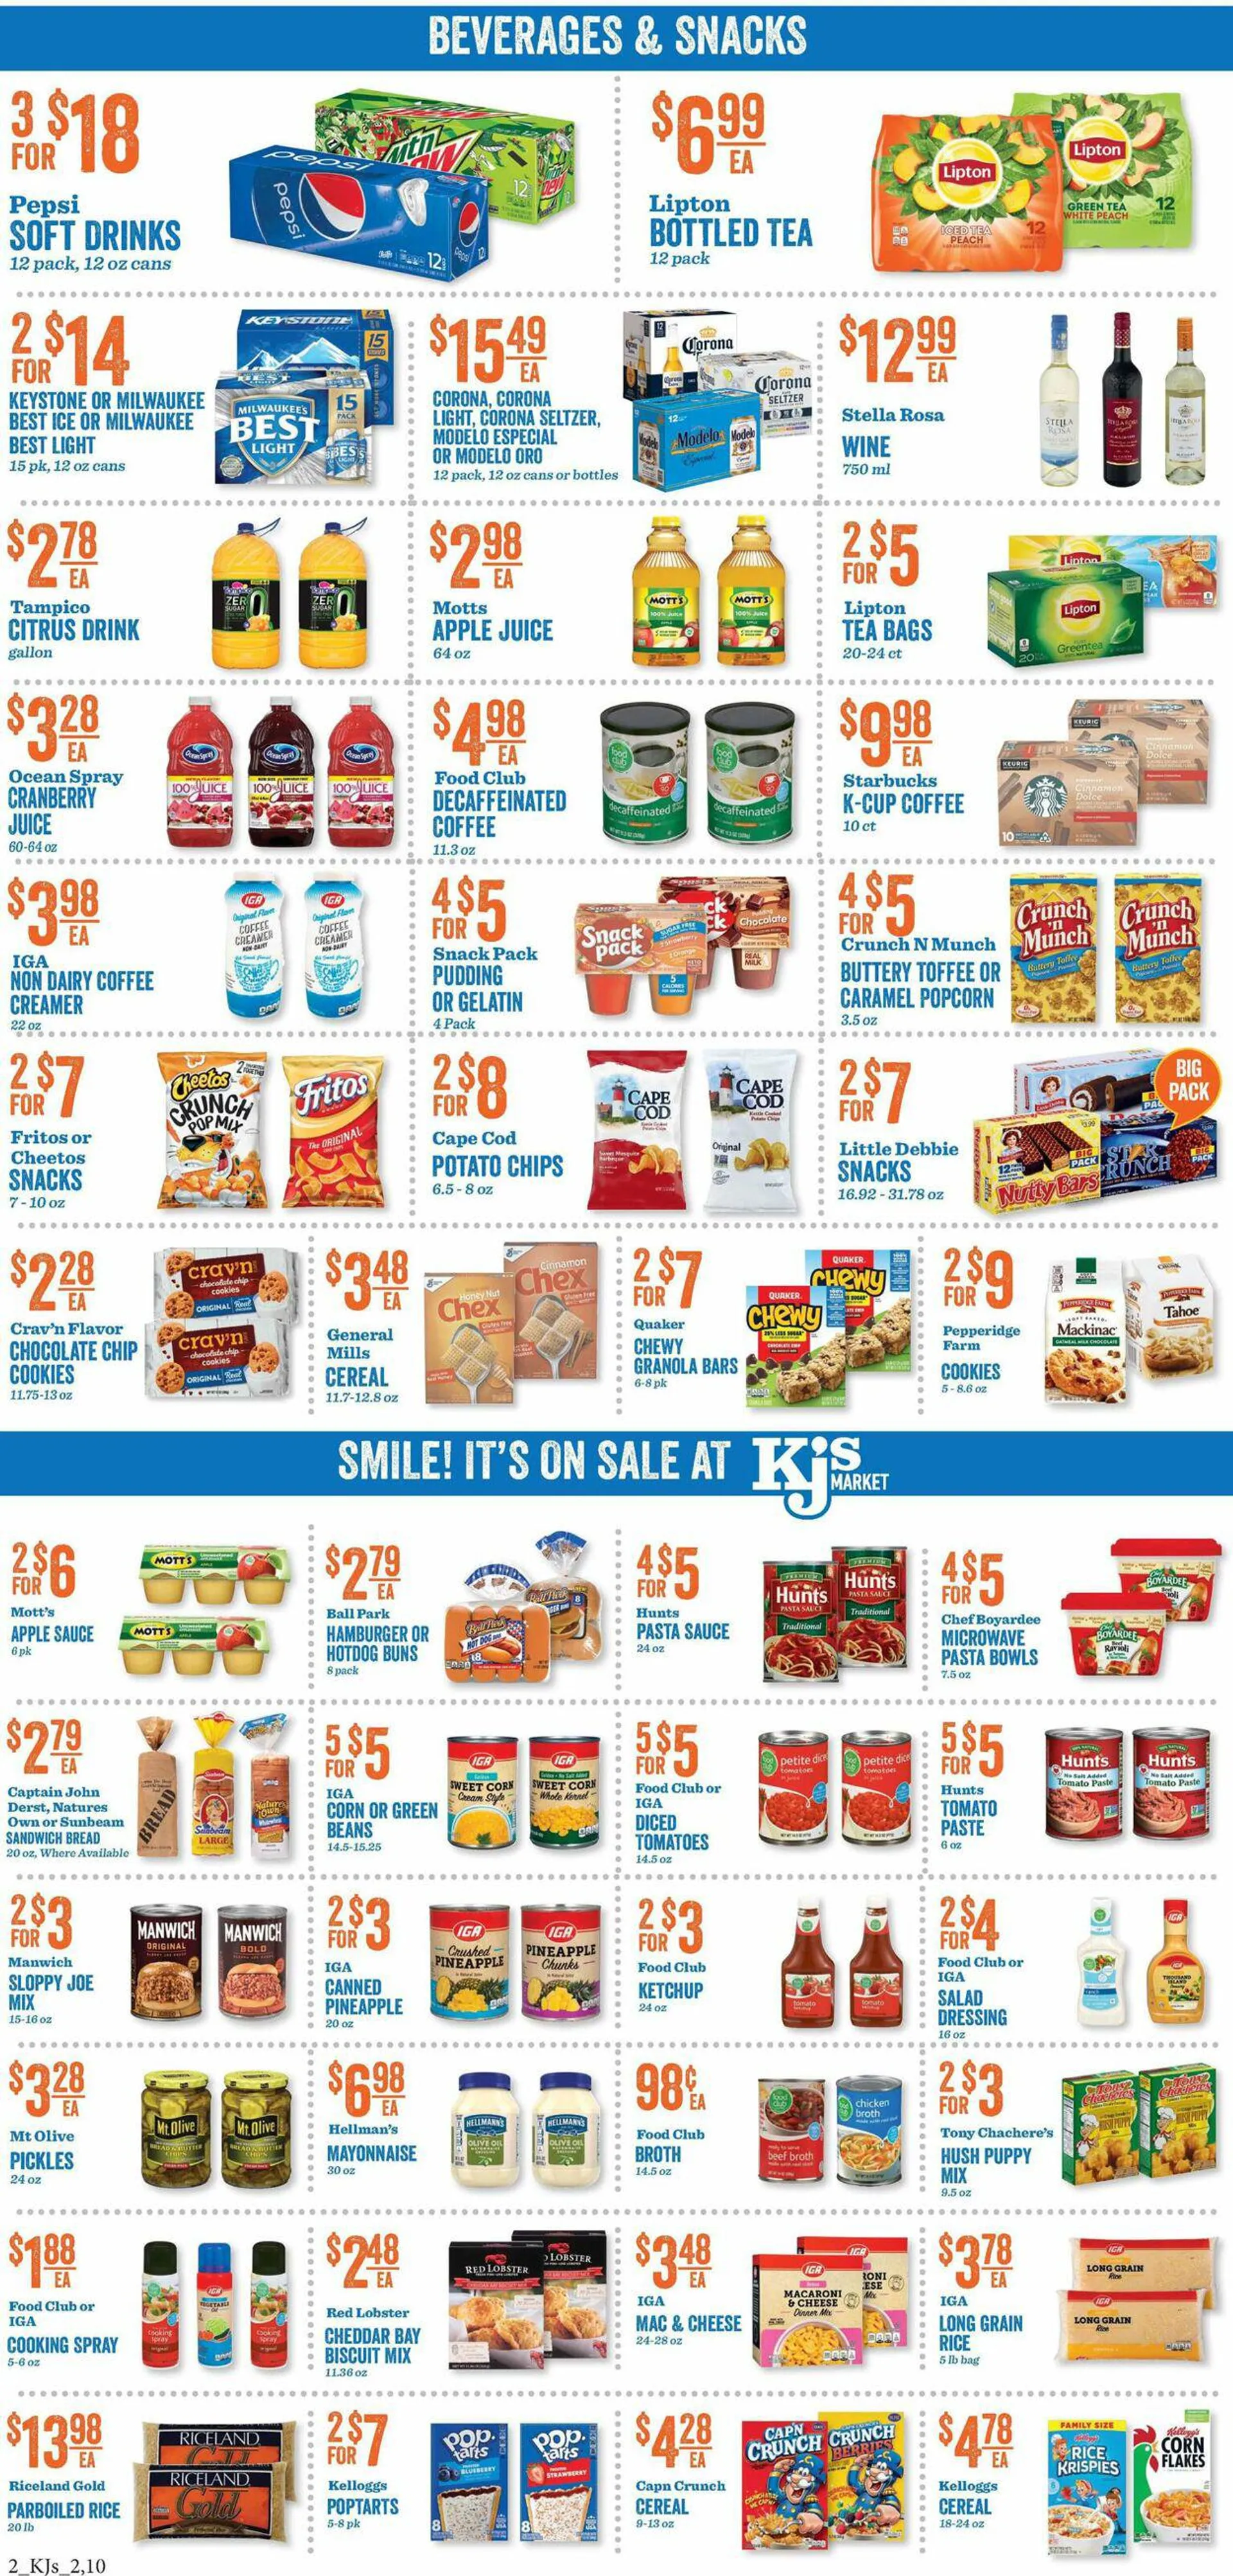 KJ´s Market Current weekly ad - 2